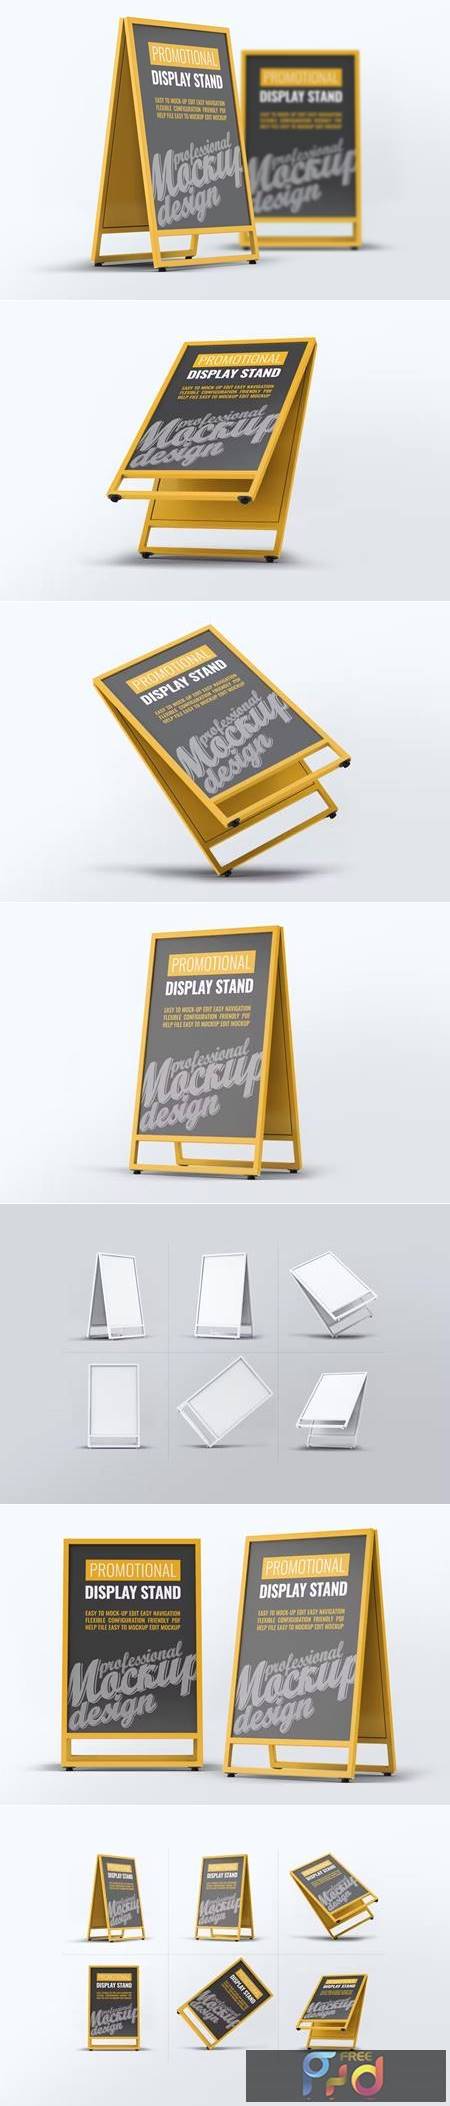 Promotional Display Stand Mock-Up MMXBFVH 1